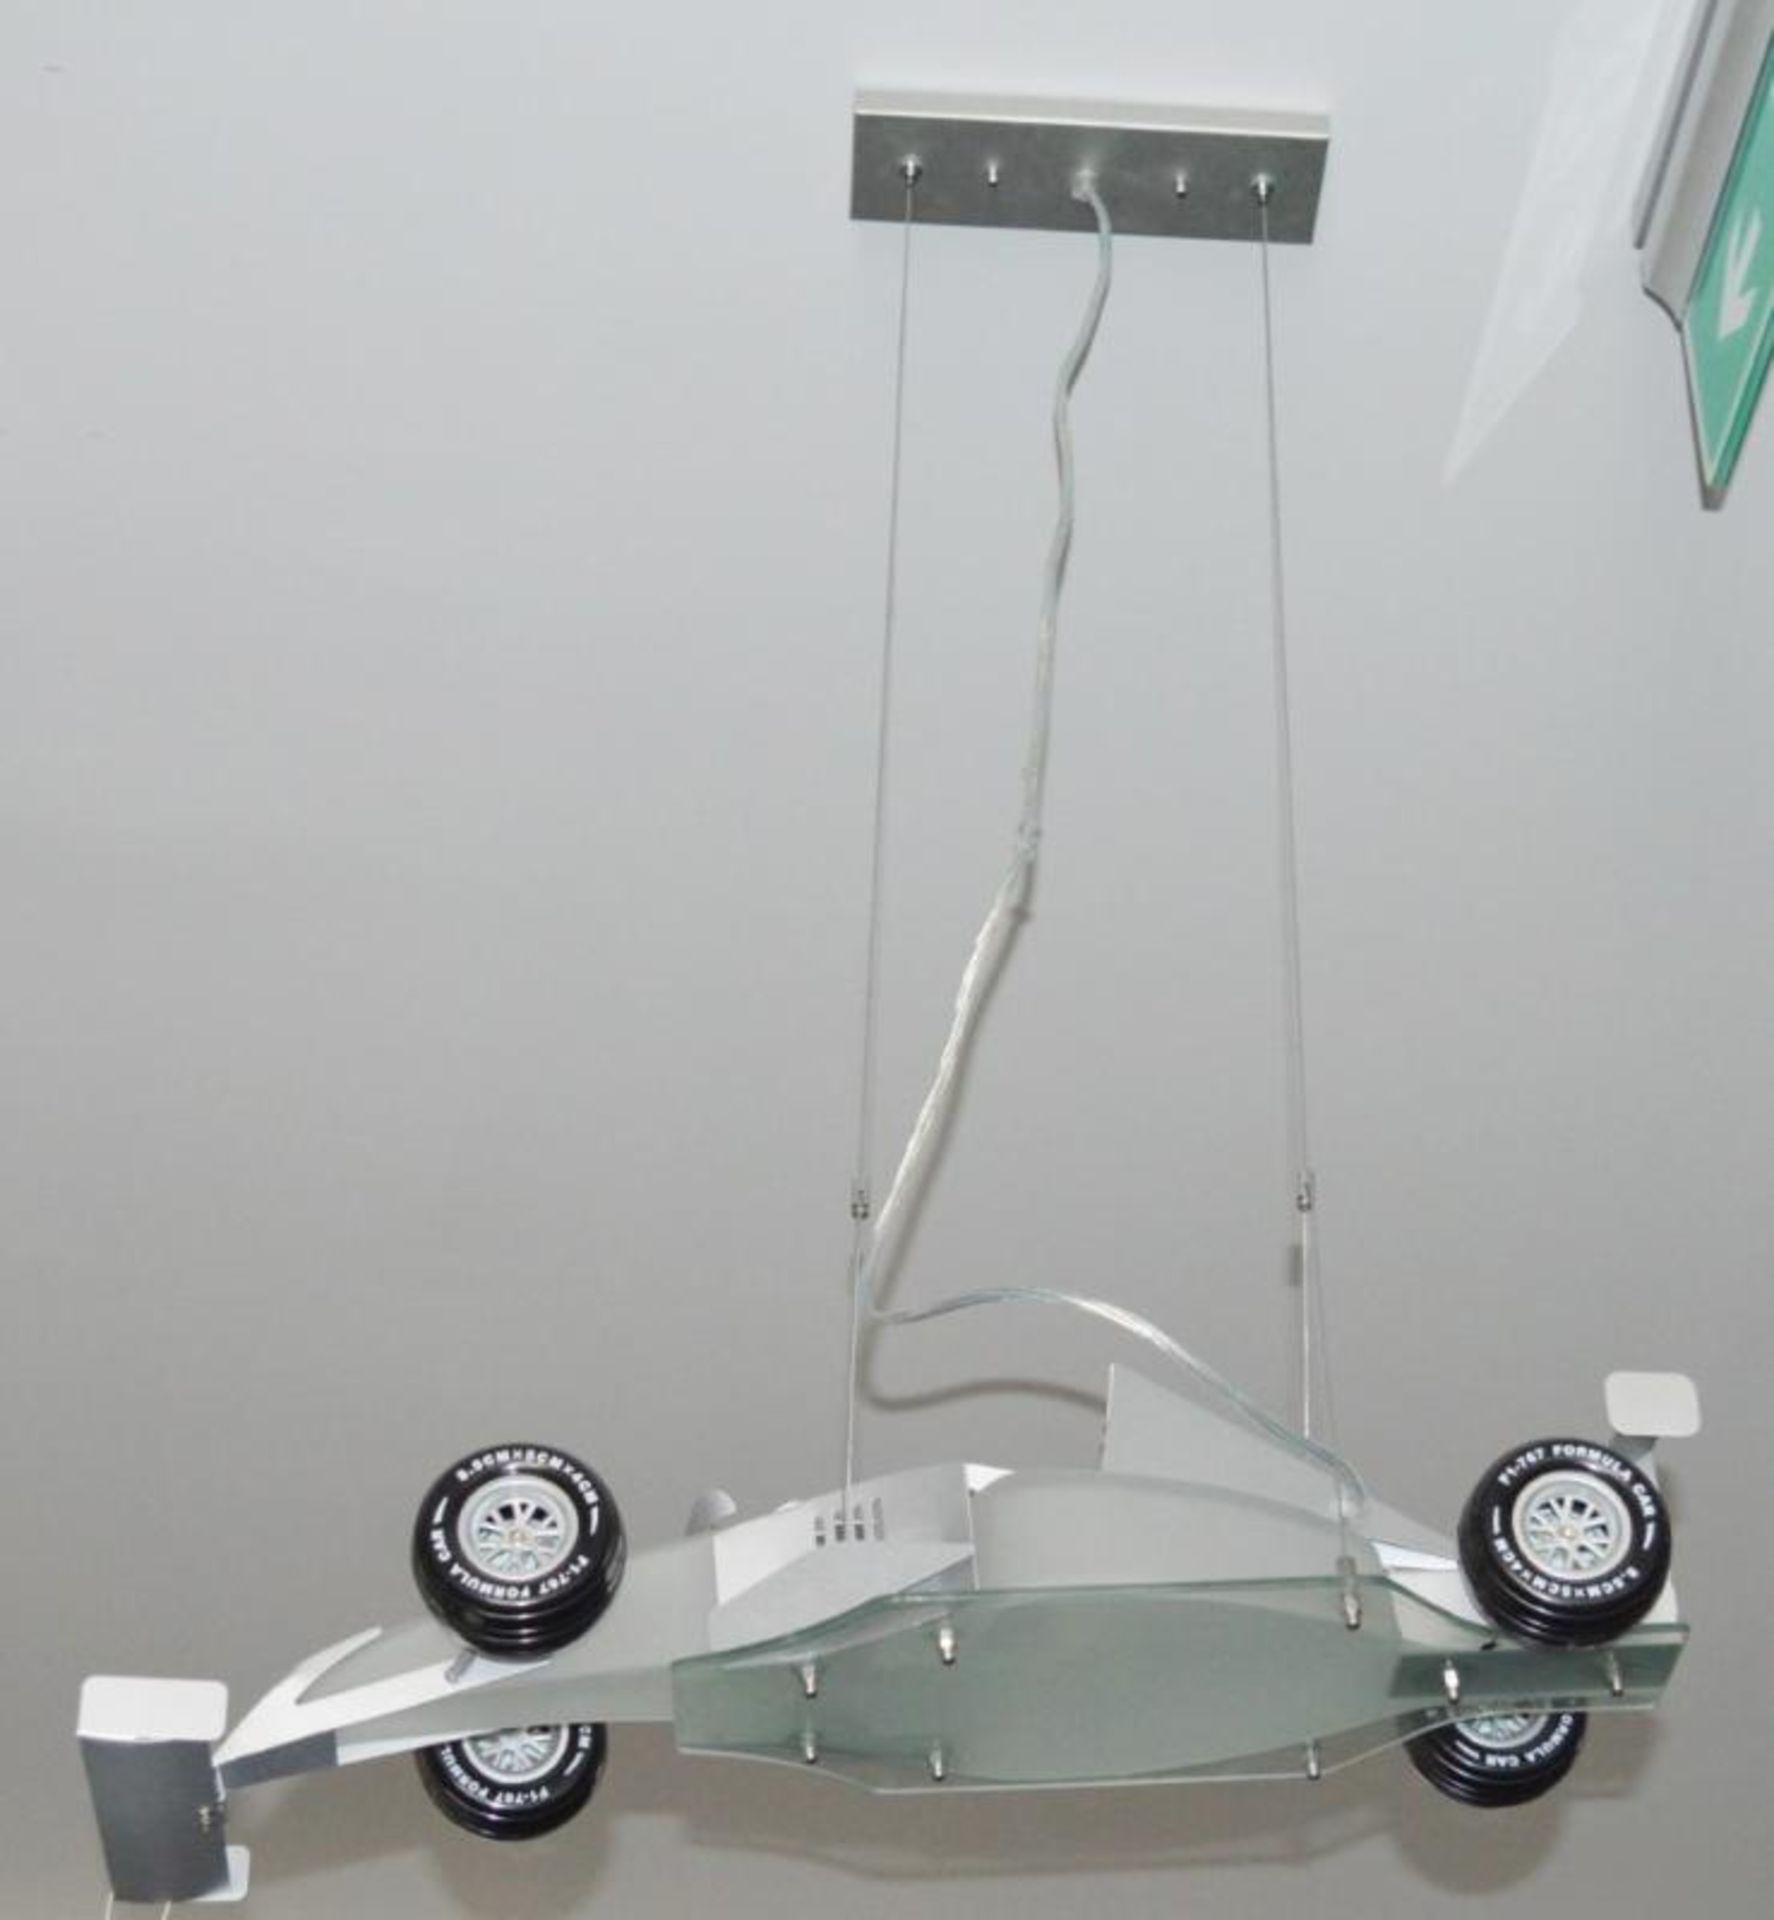 1 x Novelt Satin Silver Racing Car Ceiling Light With Frosted Glass - Ex Display Stock - CL298 - Ref - Image 2 of 3